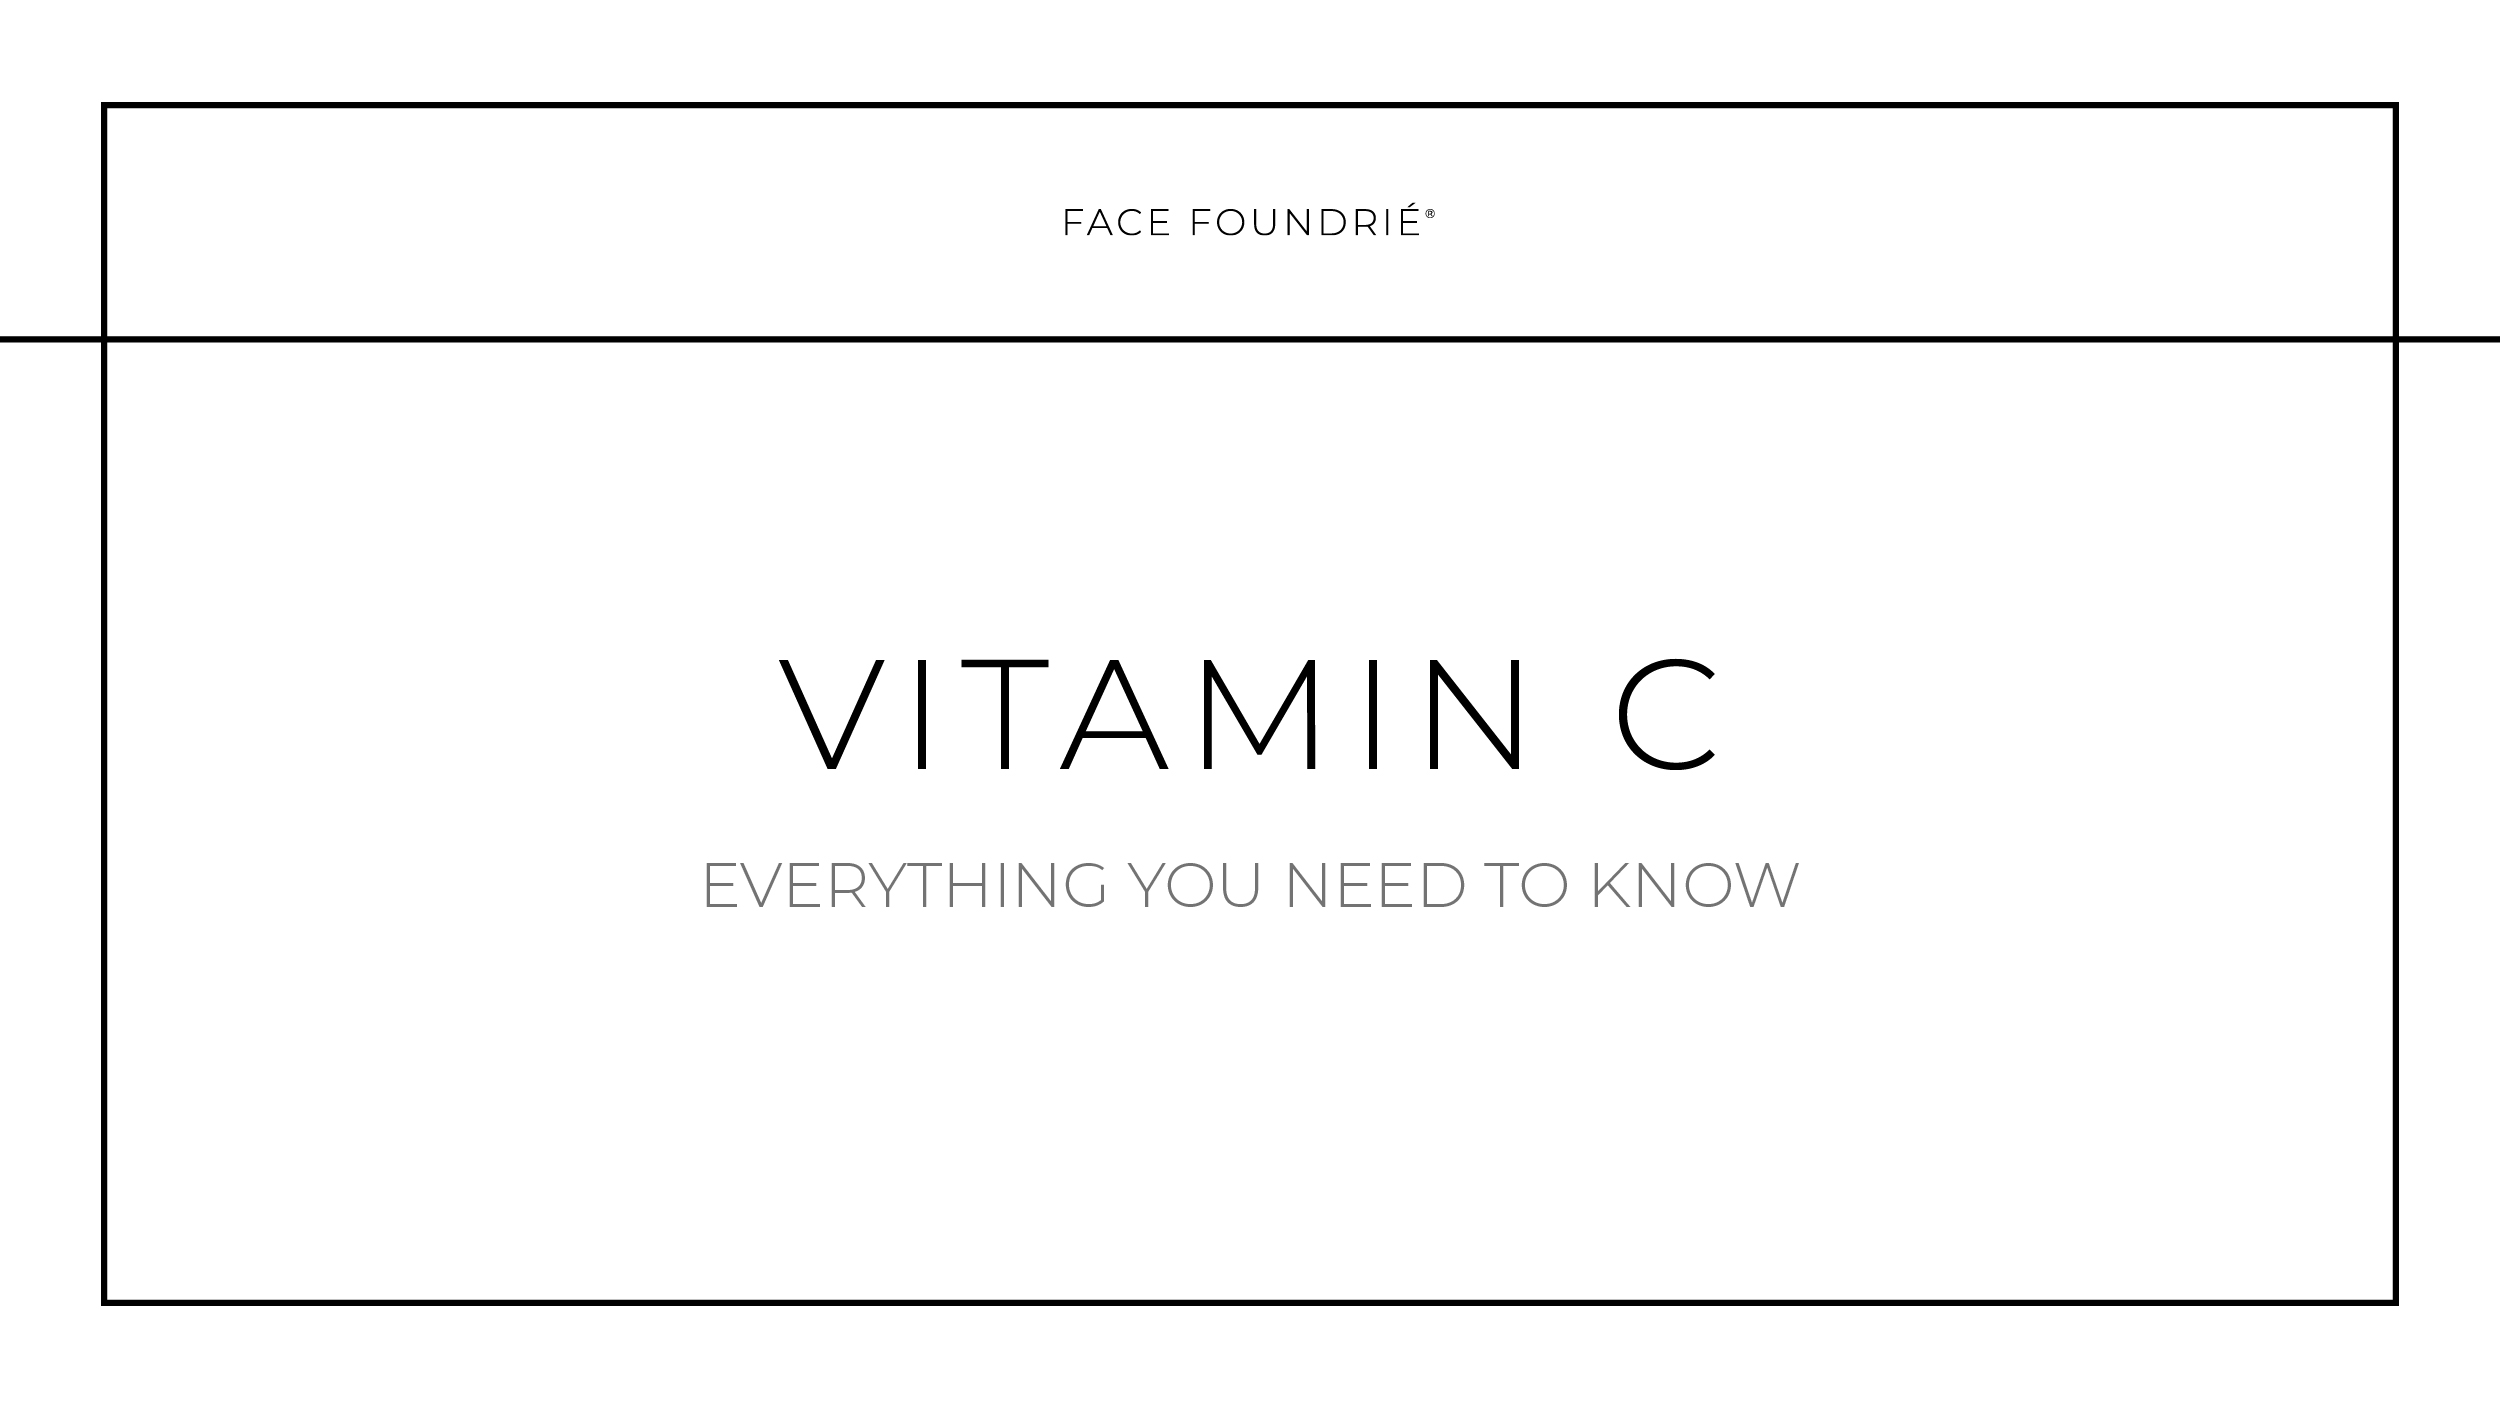 Vitamin C in Skincare: Why it is a Necessity